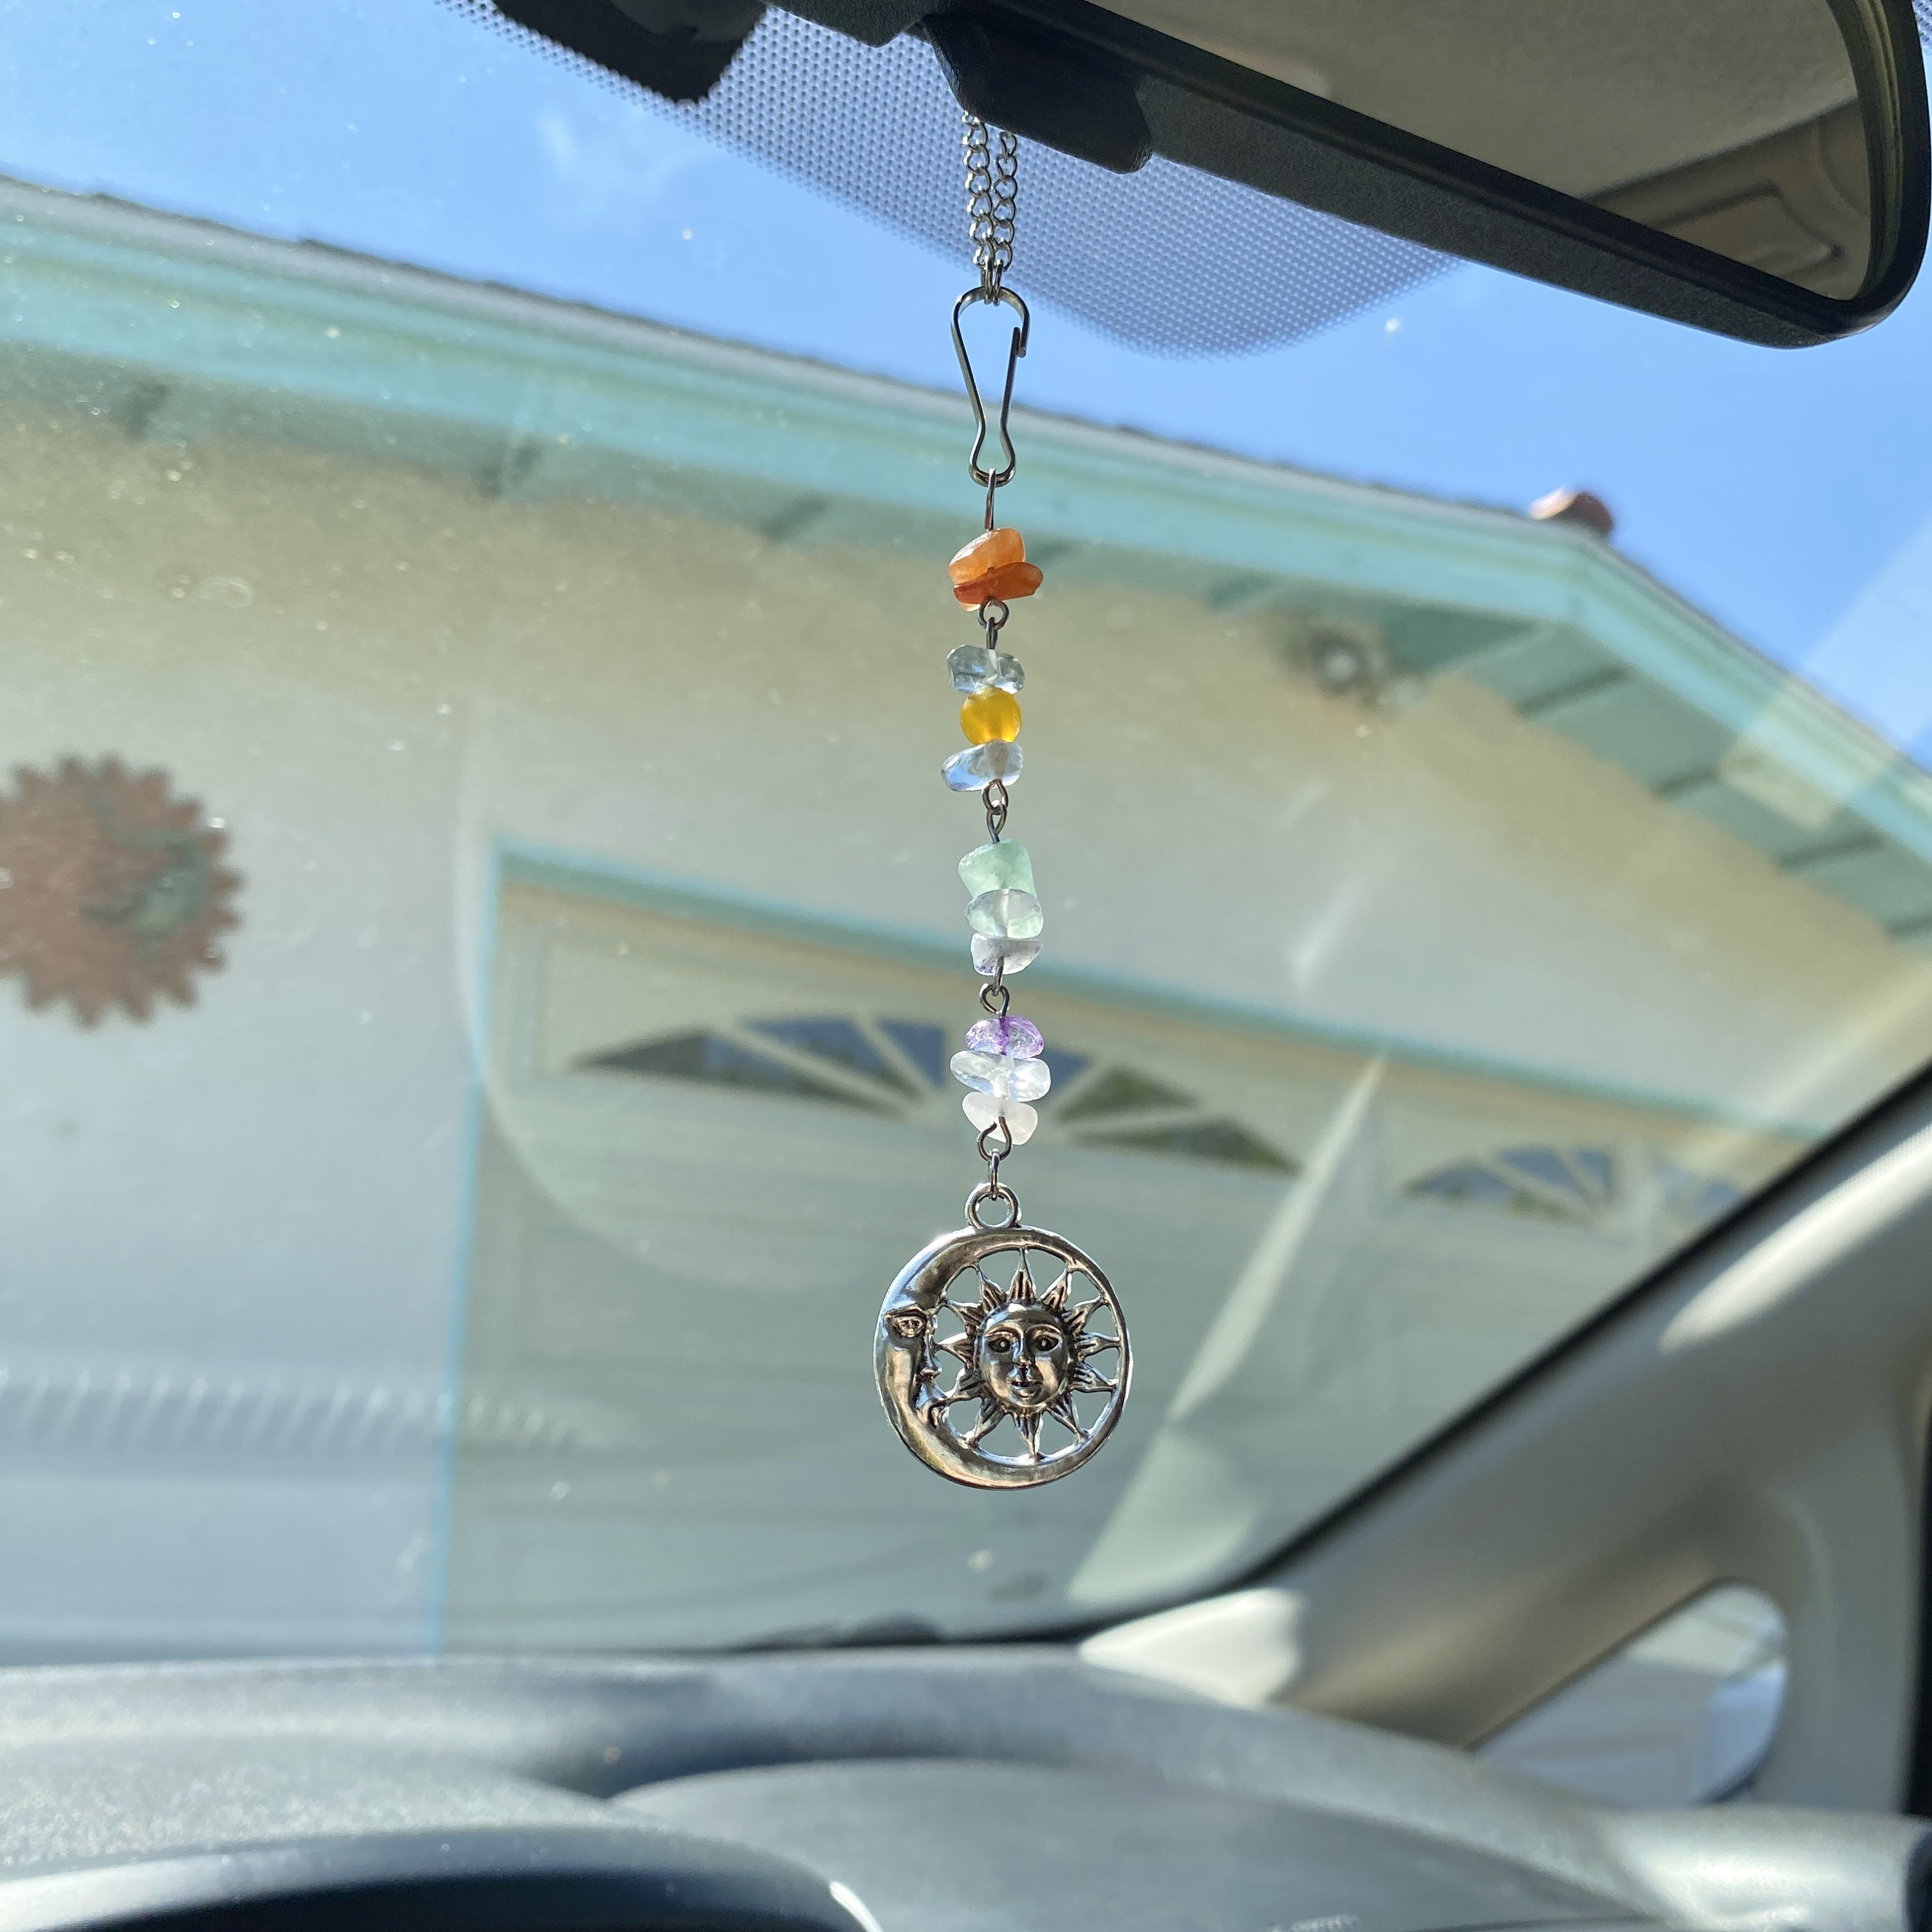 FINESTEP Bling Rear View Mirror Car Charm Pendant, Face Mask Hook/Holder,  Rhinestone Heart with Facemask Charm and Crystal Sun Catcher Hanging